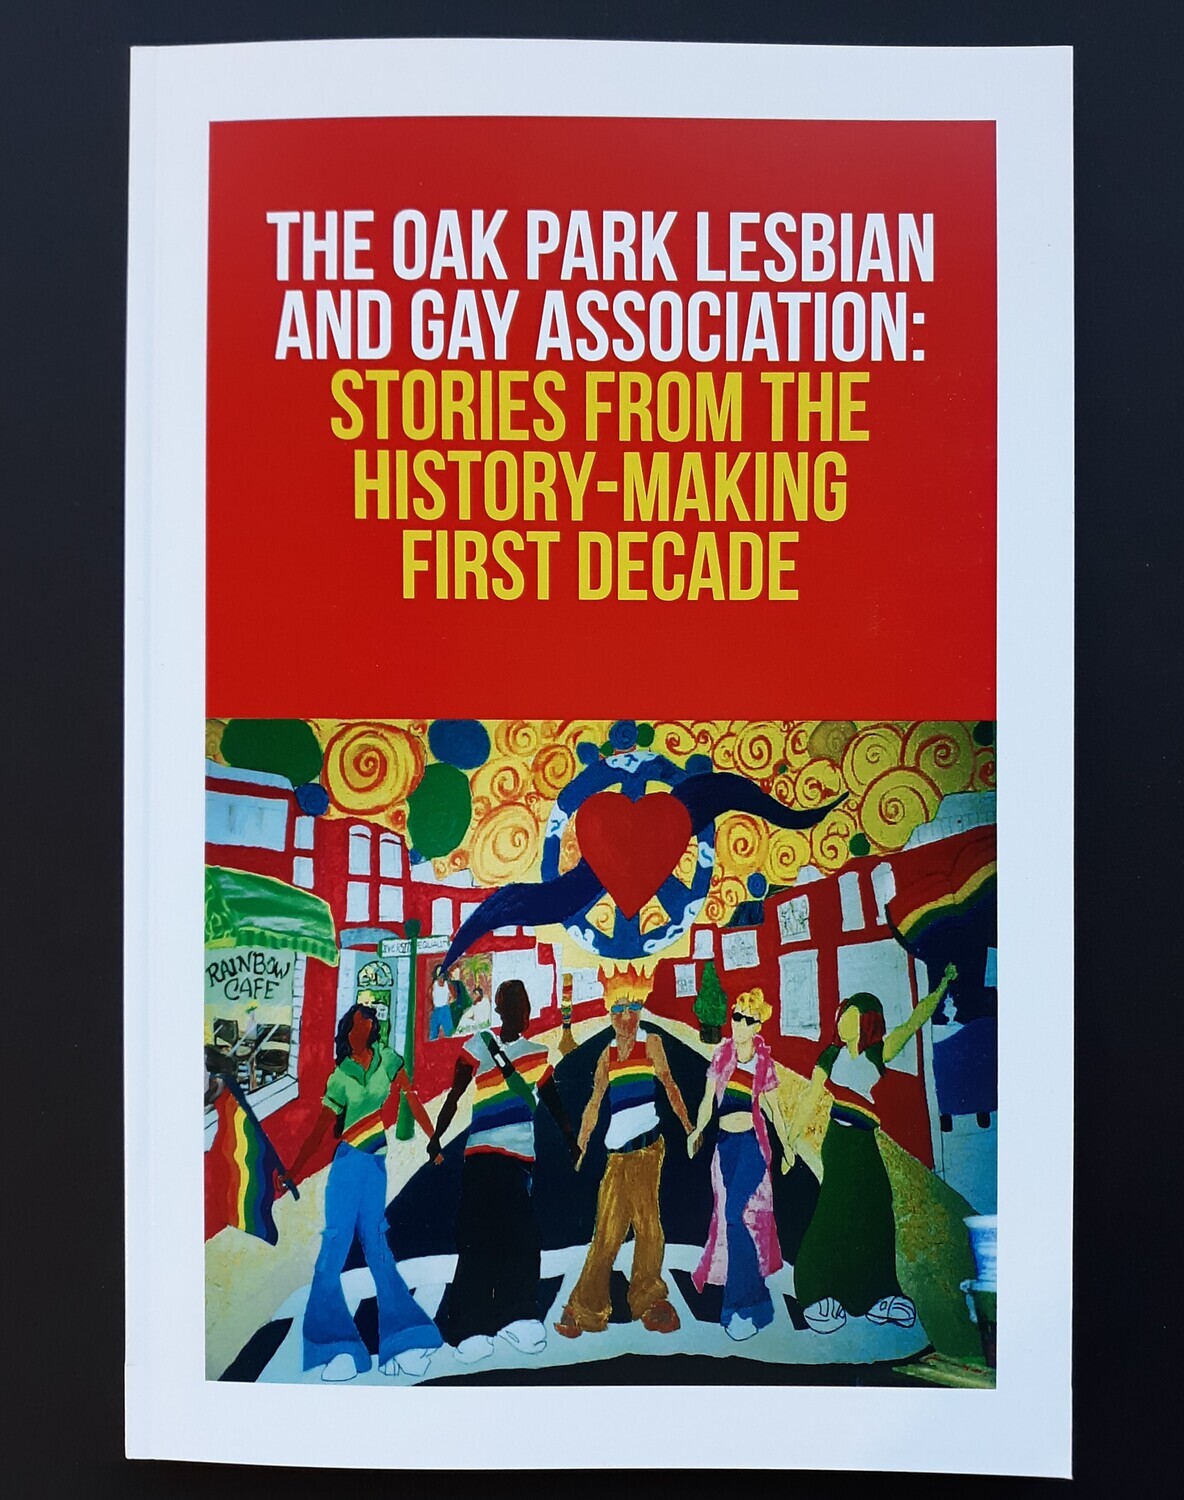 Oak Park Lesbian and Gay Association: Stories From the History-Making First Decade